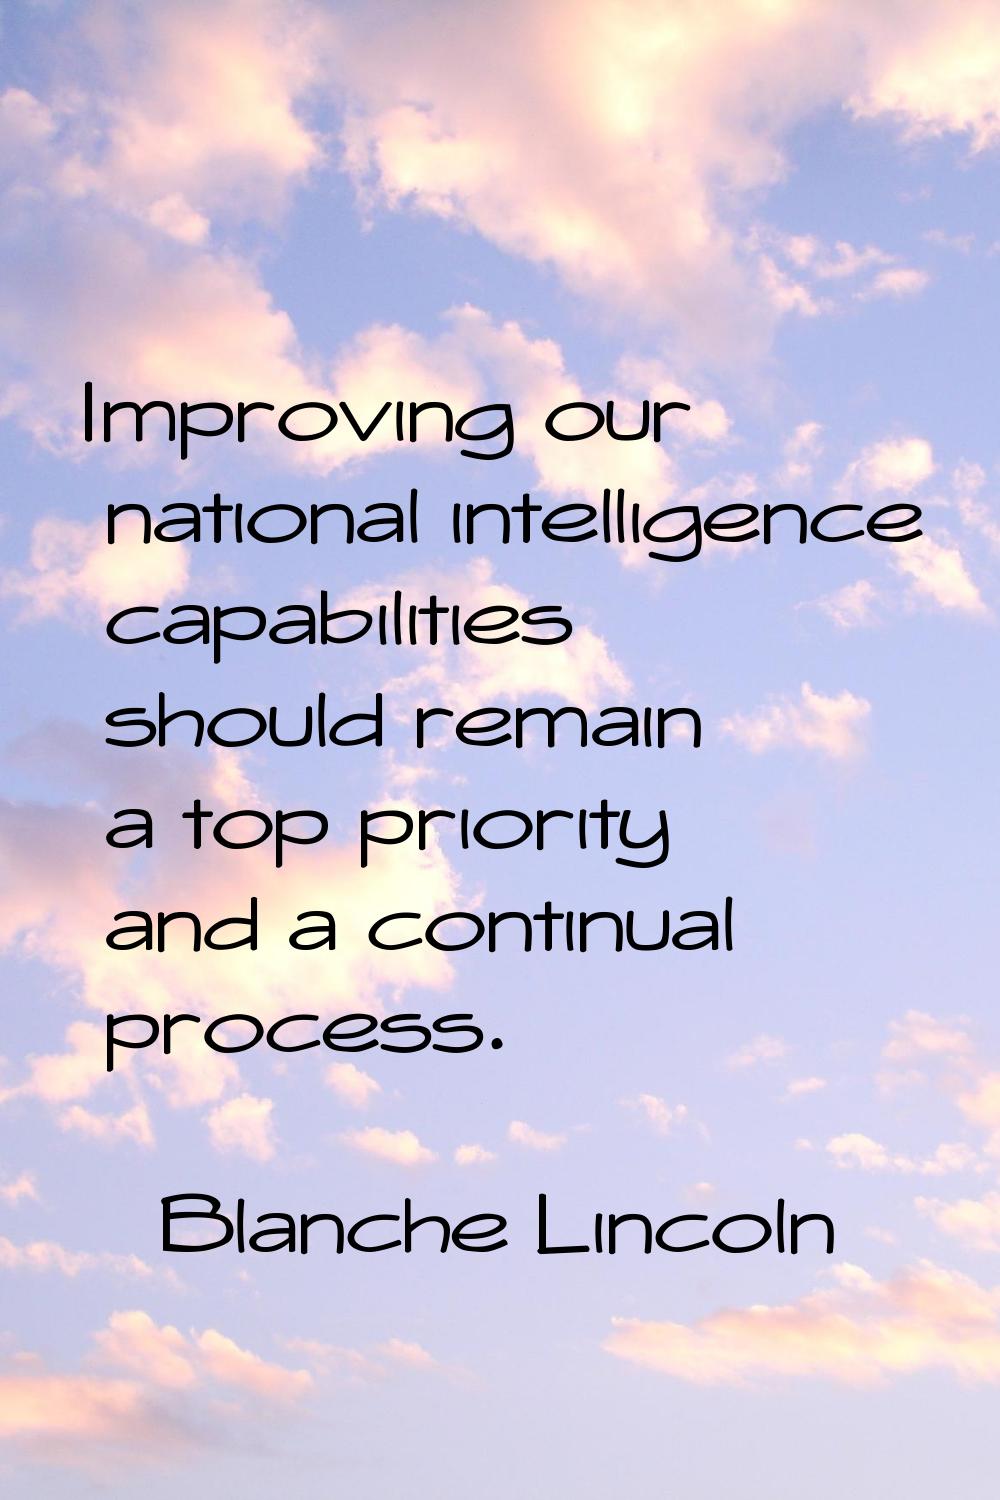 Improving our national intelligence capabilities should remain a top priority and a continual proce